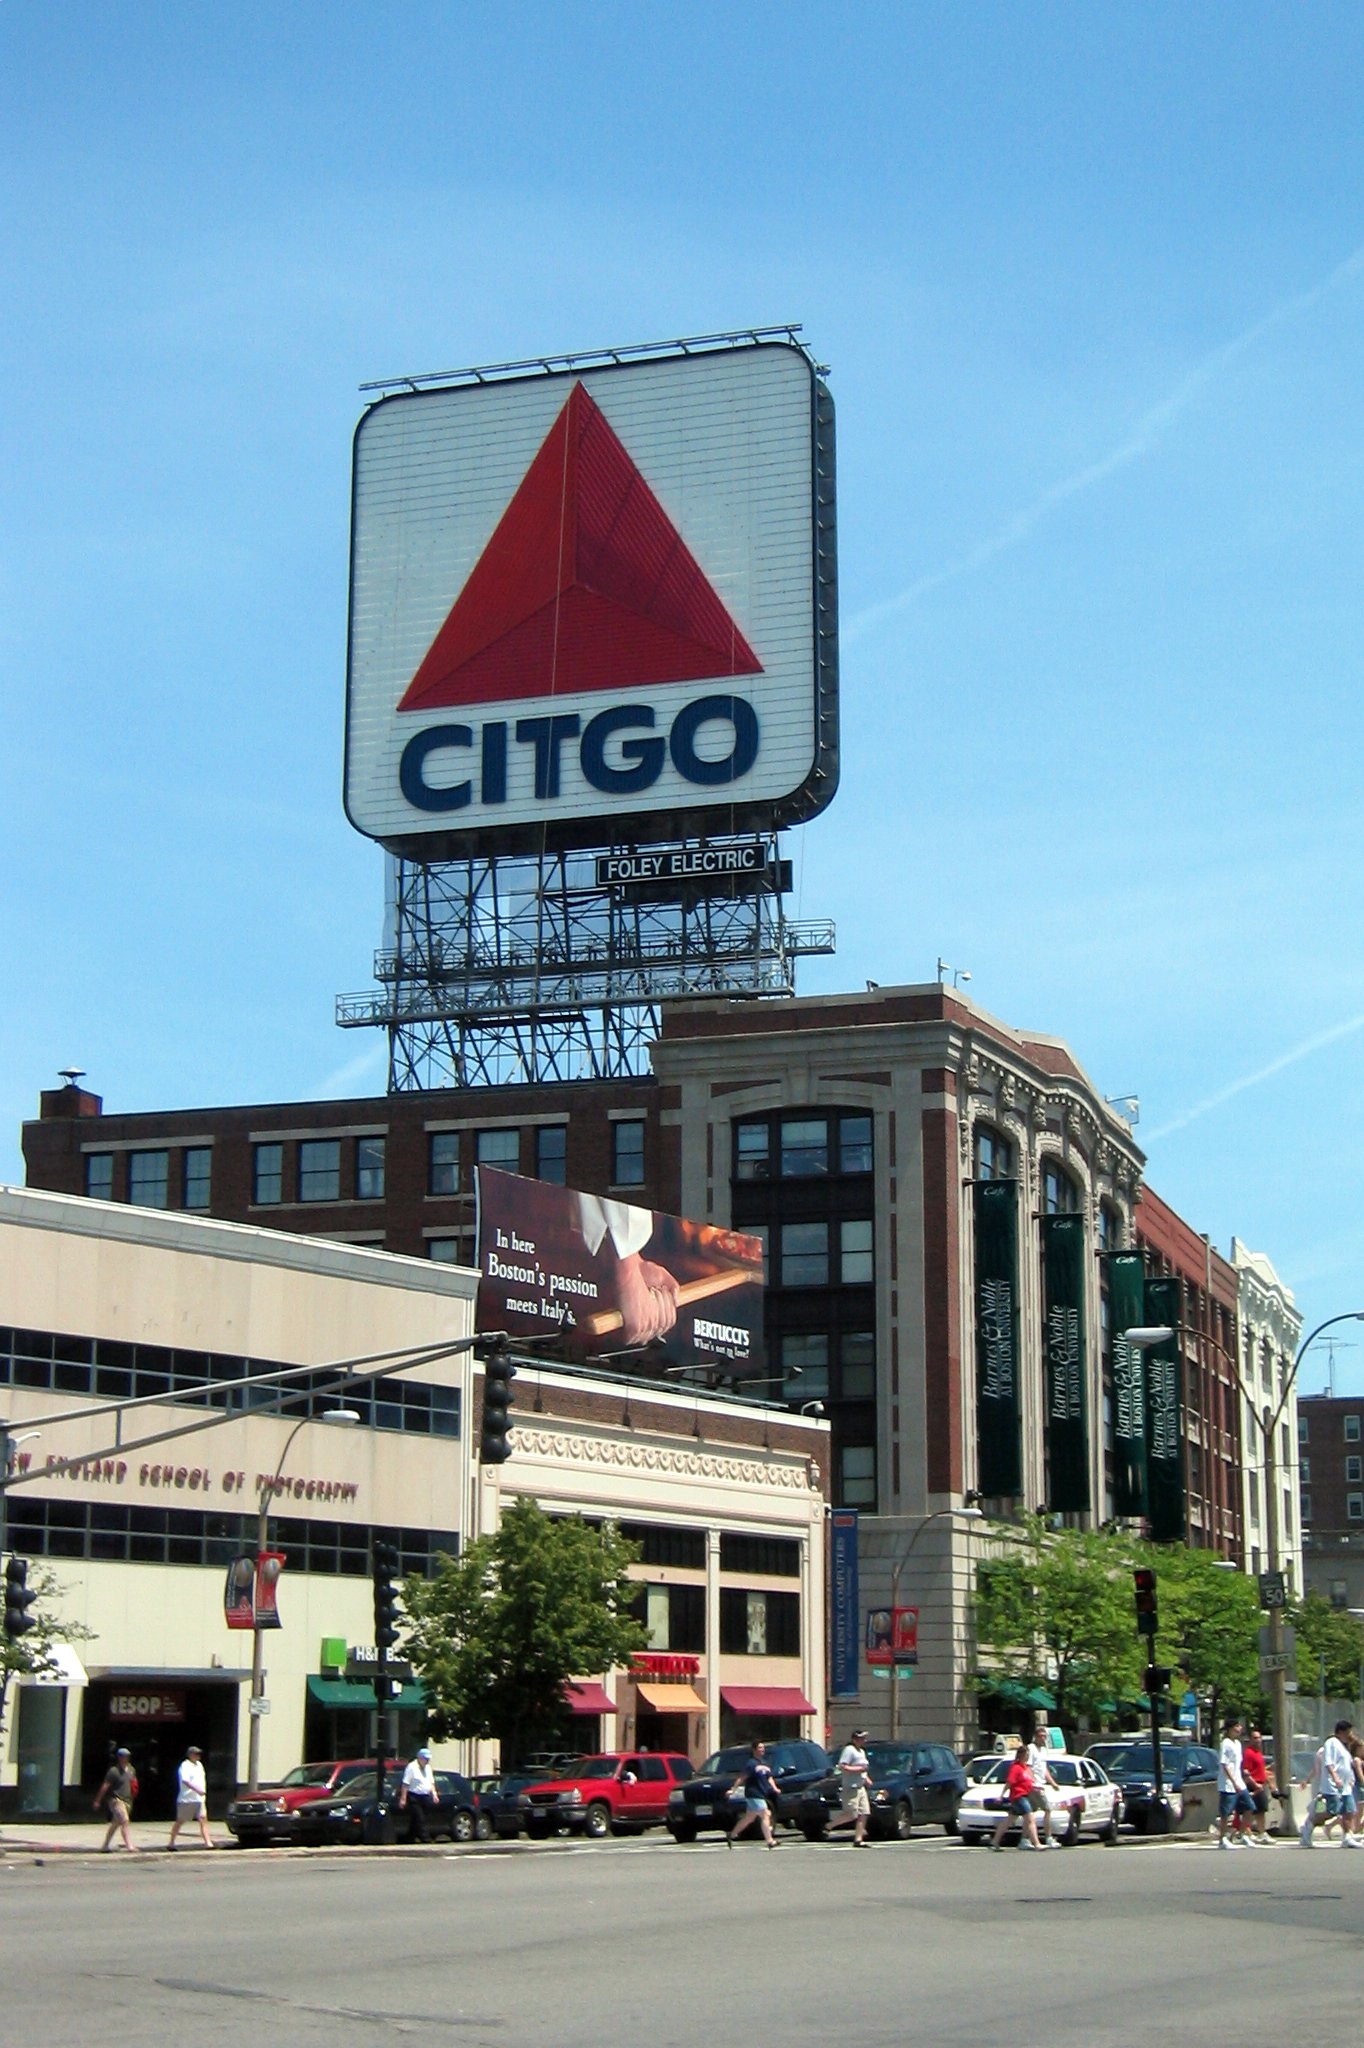 Boston - Kenmore Square: Citgo Kenmore Square exists at the intersection of several Beacon Street, Commonwealth Avenue and Brookline Avenue, abutting Boston University and serving as a transportation hub for nearby Landsdowne Street and Fenway Park. The large, double-faced sign featuring the Citgo "trimark" logo has become a landmark, partly because of its visibility over the Green Monster during televised Red Sox games. The current 60 ft x 60 ft incarnation, unveiled in March 2005 after a six-month restoration project, features thousands of light-emitting diodes (LEDs). LEDs were selected for their durability, energy efficiency, intensity, and ease of maintenance. Earlier versions featured neon lighting; the previous sign contained some 5,878 glass tubes with a total length of over five miles. The first sign, featuring the Cities Service logo, was built in 1940, and replaced with the trimark in 1965. In 1979 Governor Edward J. King ordered it turned off as a symbol of energy conservation. Four years later, Citgo attempted to disassemble the weatherbeaten sign, and was surprised to be met with widespread public affection for the sign and protest at its threatened removal. The Boston Landmarks Commission ordered its disassembly postponed while the issue was debated. While never formally declared a landmark, it was refurbished and relit by Citgo in 1983 and has remained in operation ever since. Citgo is now a subidiary of Petróleos de Venezuela S.A. and in 2006, Jerry McDermott, a Boston city councillor, proposed that the sign be removed in response to Venezuelan President Hugo Chavez's insults toward America . McDermontt also suggested draping an American flag or Boston Red Sox banner over the sign until Chavez is out of office.